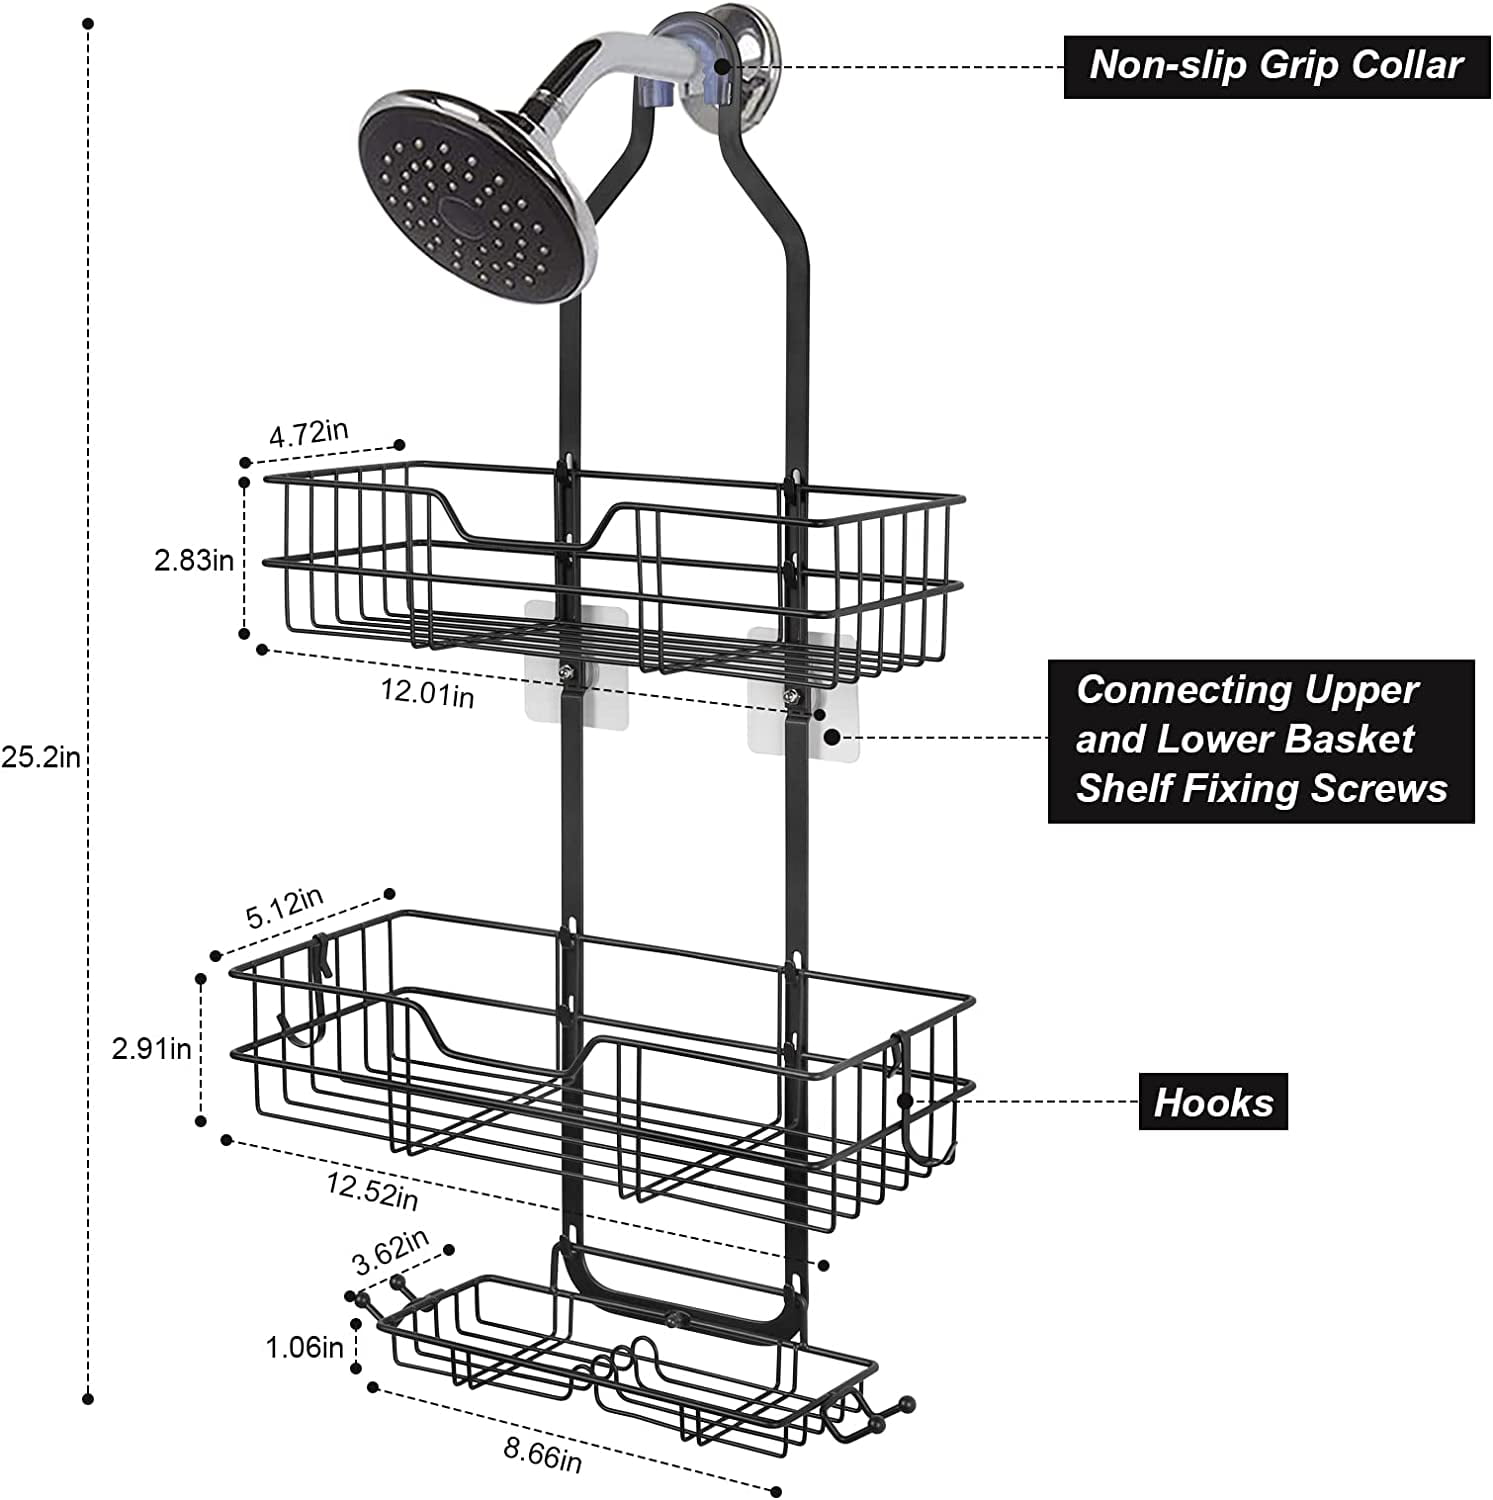  Hanging Shower Caddy Over Shower Head: Adjustable Large Shower  Organizer with Soap Holder - Rust Proof Bathroom Shelf Shampoo Storage Rack  with 3-Tier Baskets - 4 Movable Hooks for Razor Loofah